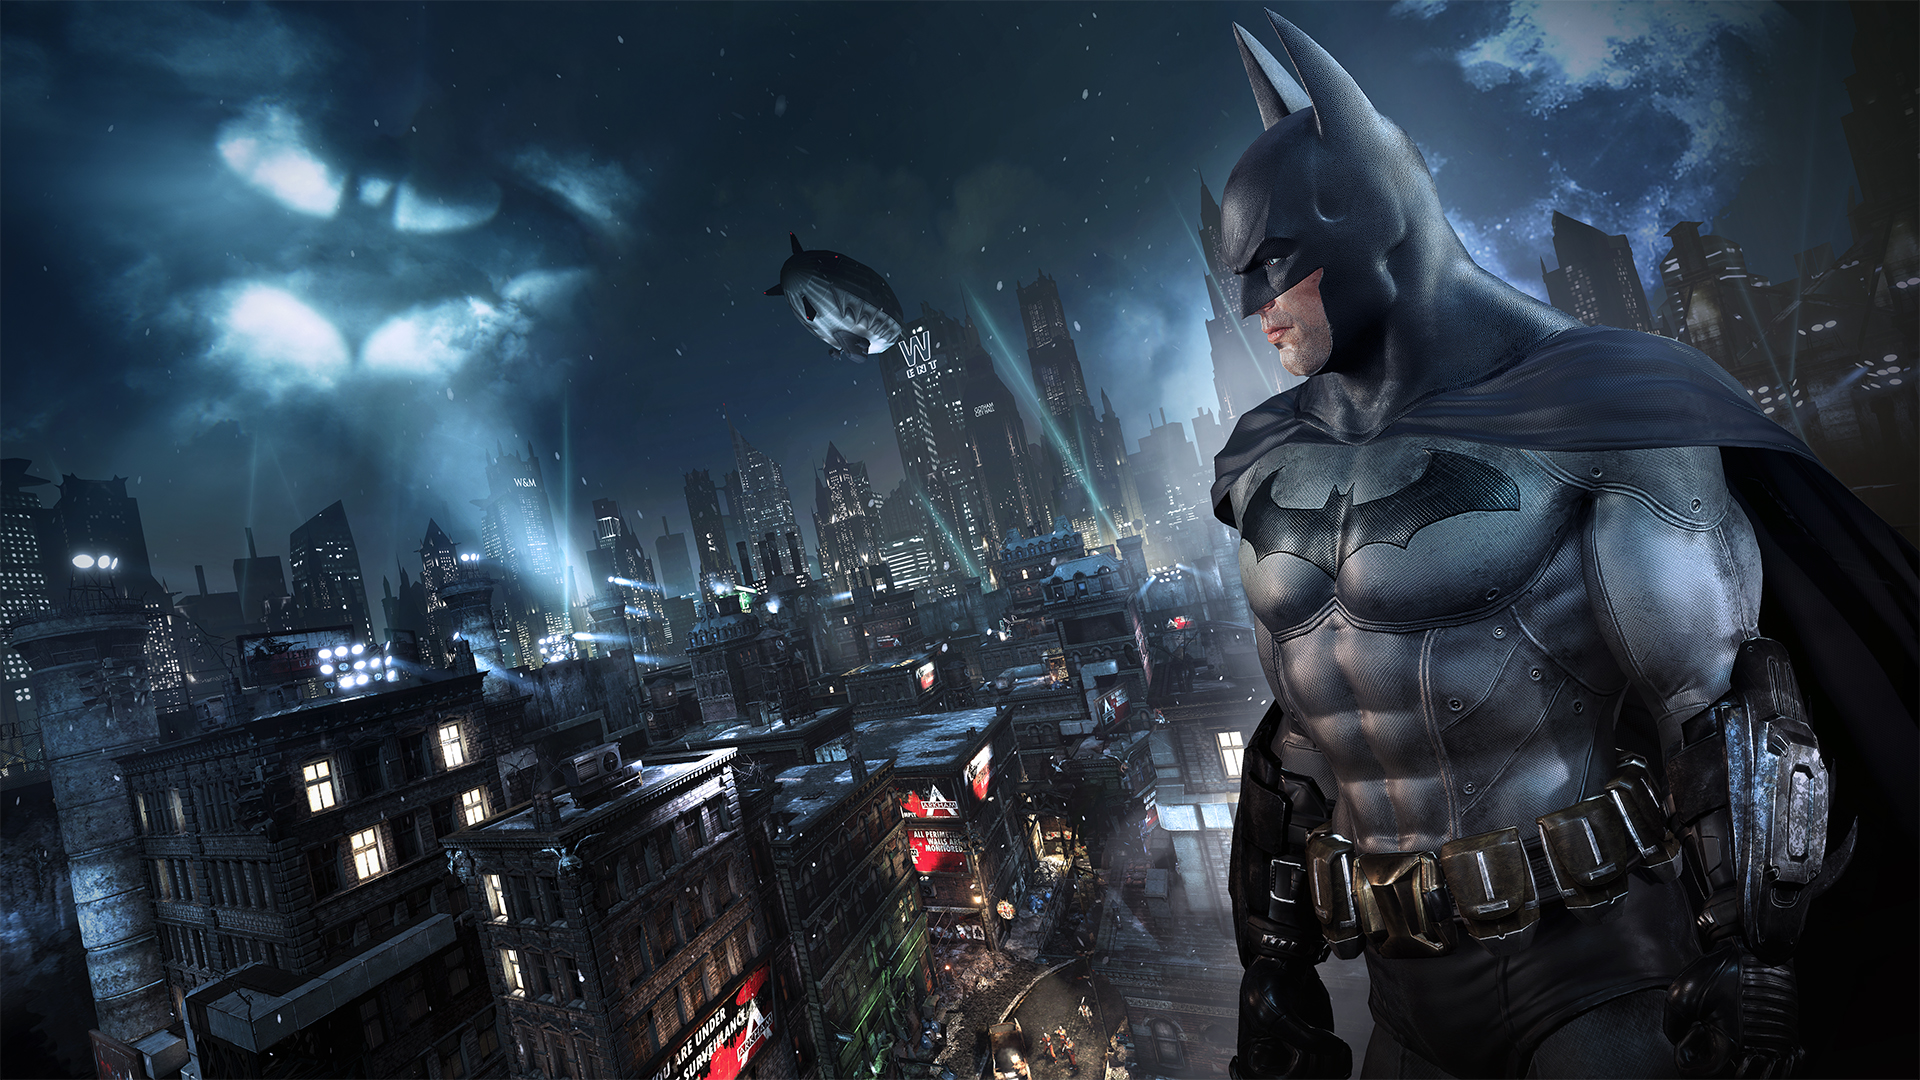 Warner Bros Holding DC Fandome event in August With New Game Announcements and More